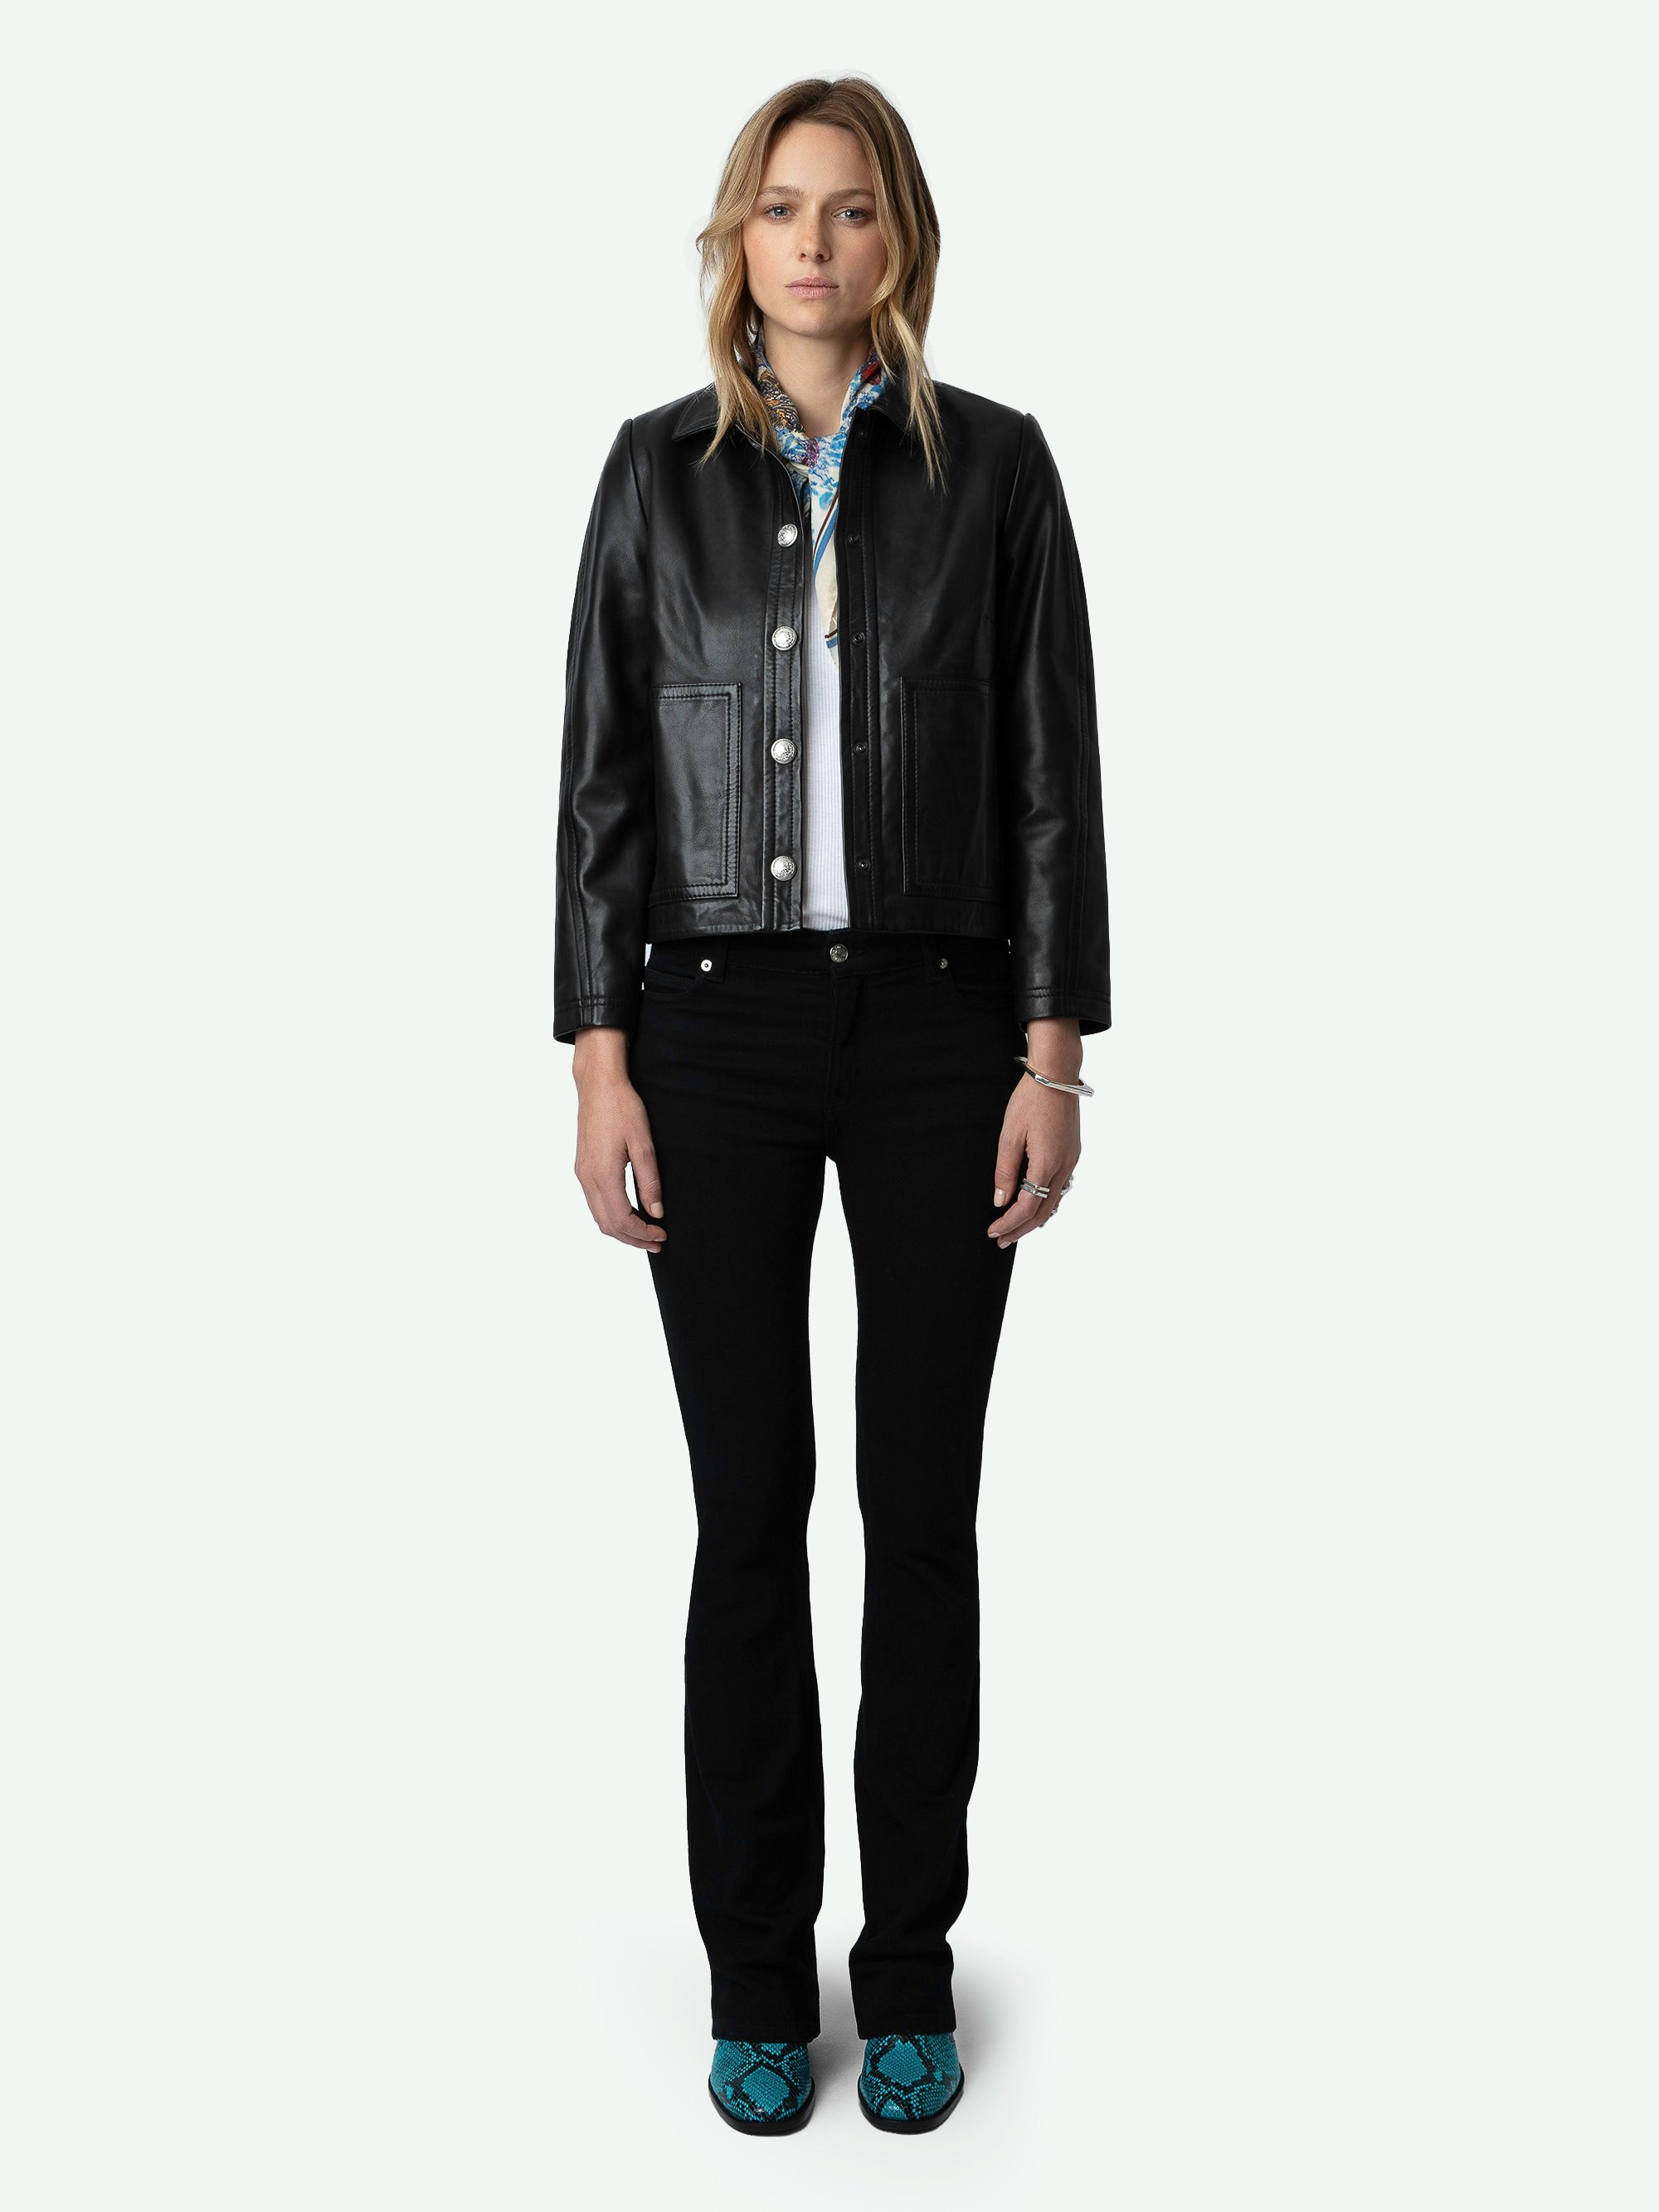 Litchi Leather Jacket - Long-sleeved smooth leather button-up cropped jacket with pockets and cut-outs.